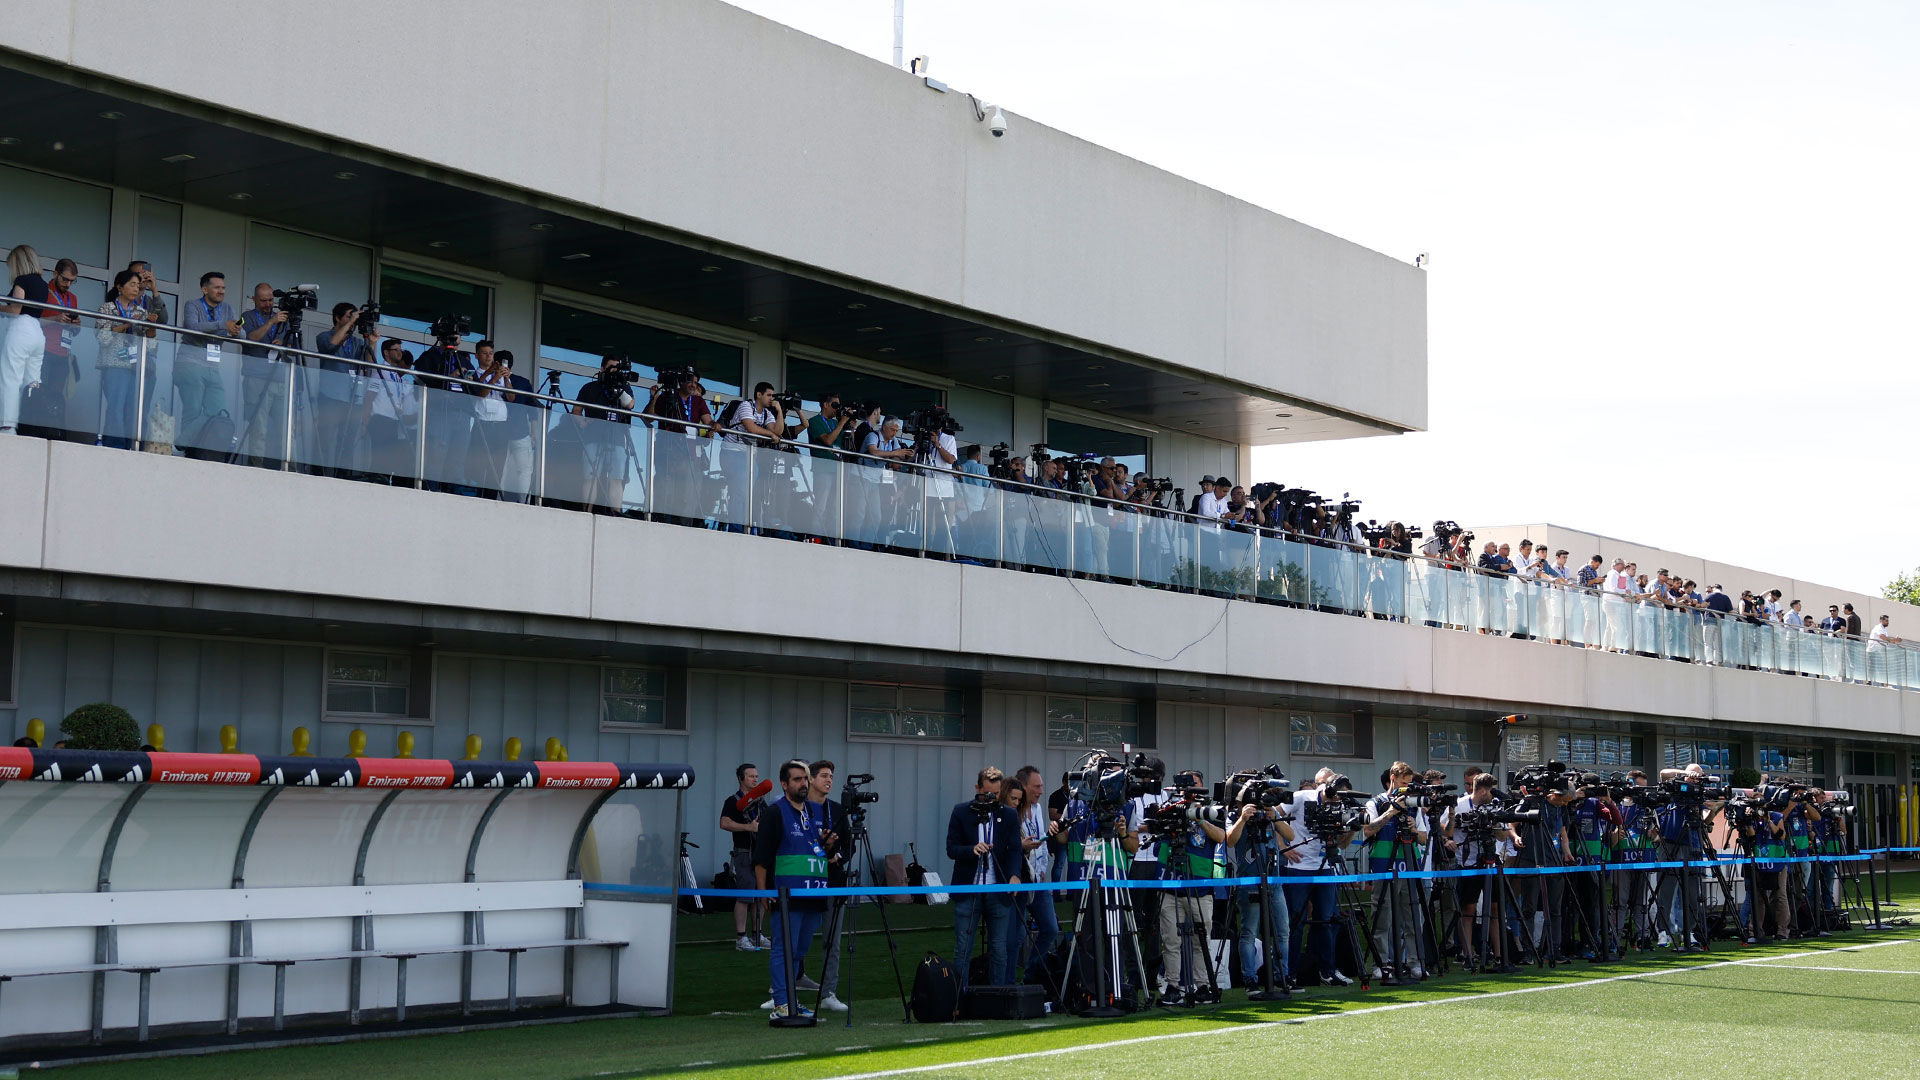 Over 130 media outlets from around the world take part in UEFA Open Media Day